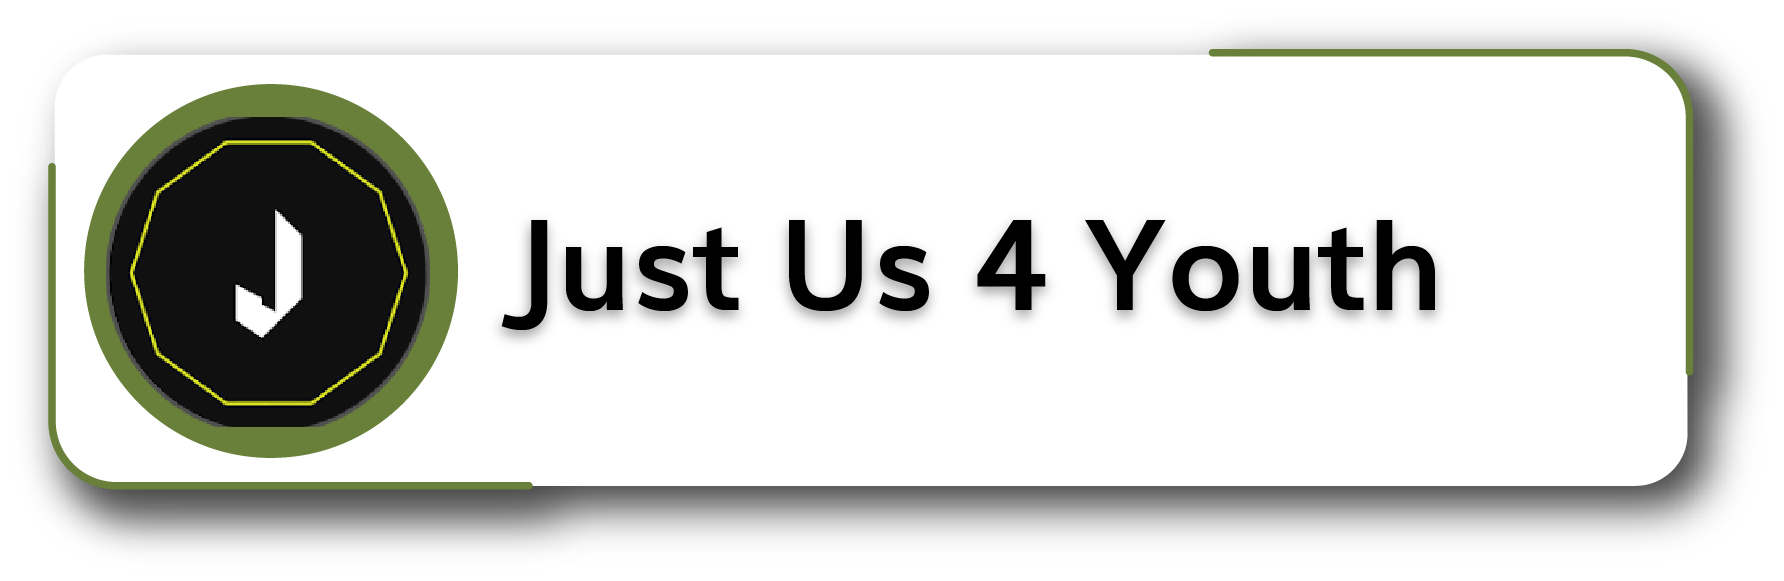 Just Us 4 Youth Button